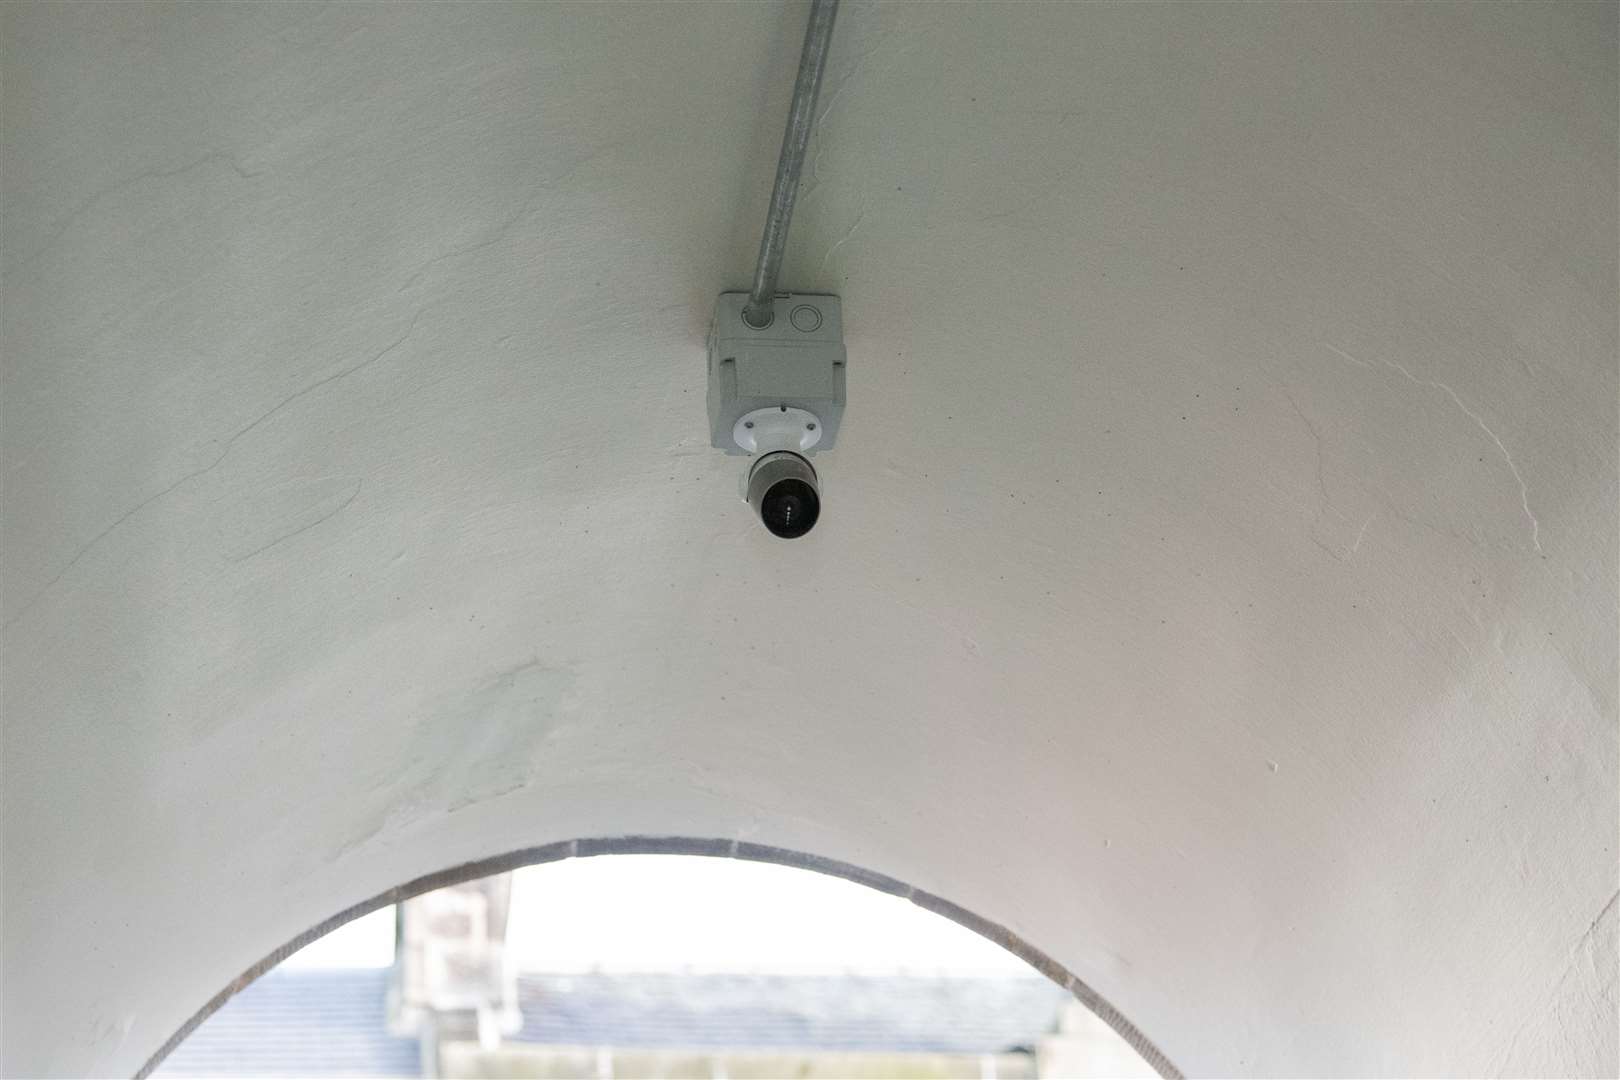 Video cameras are in place to deter future attacks.